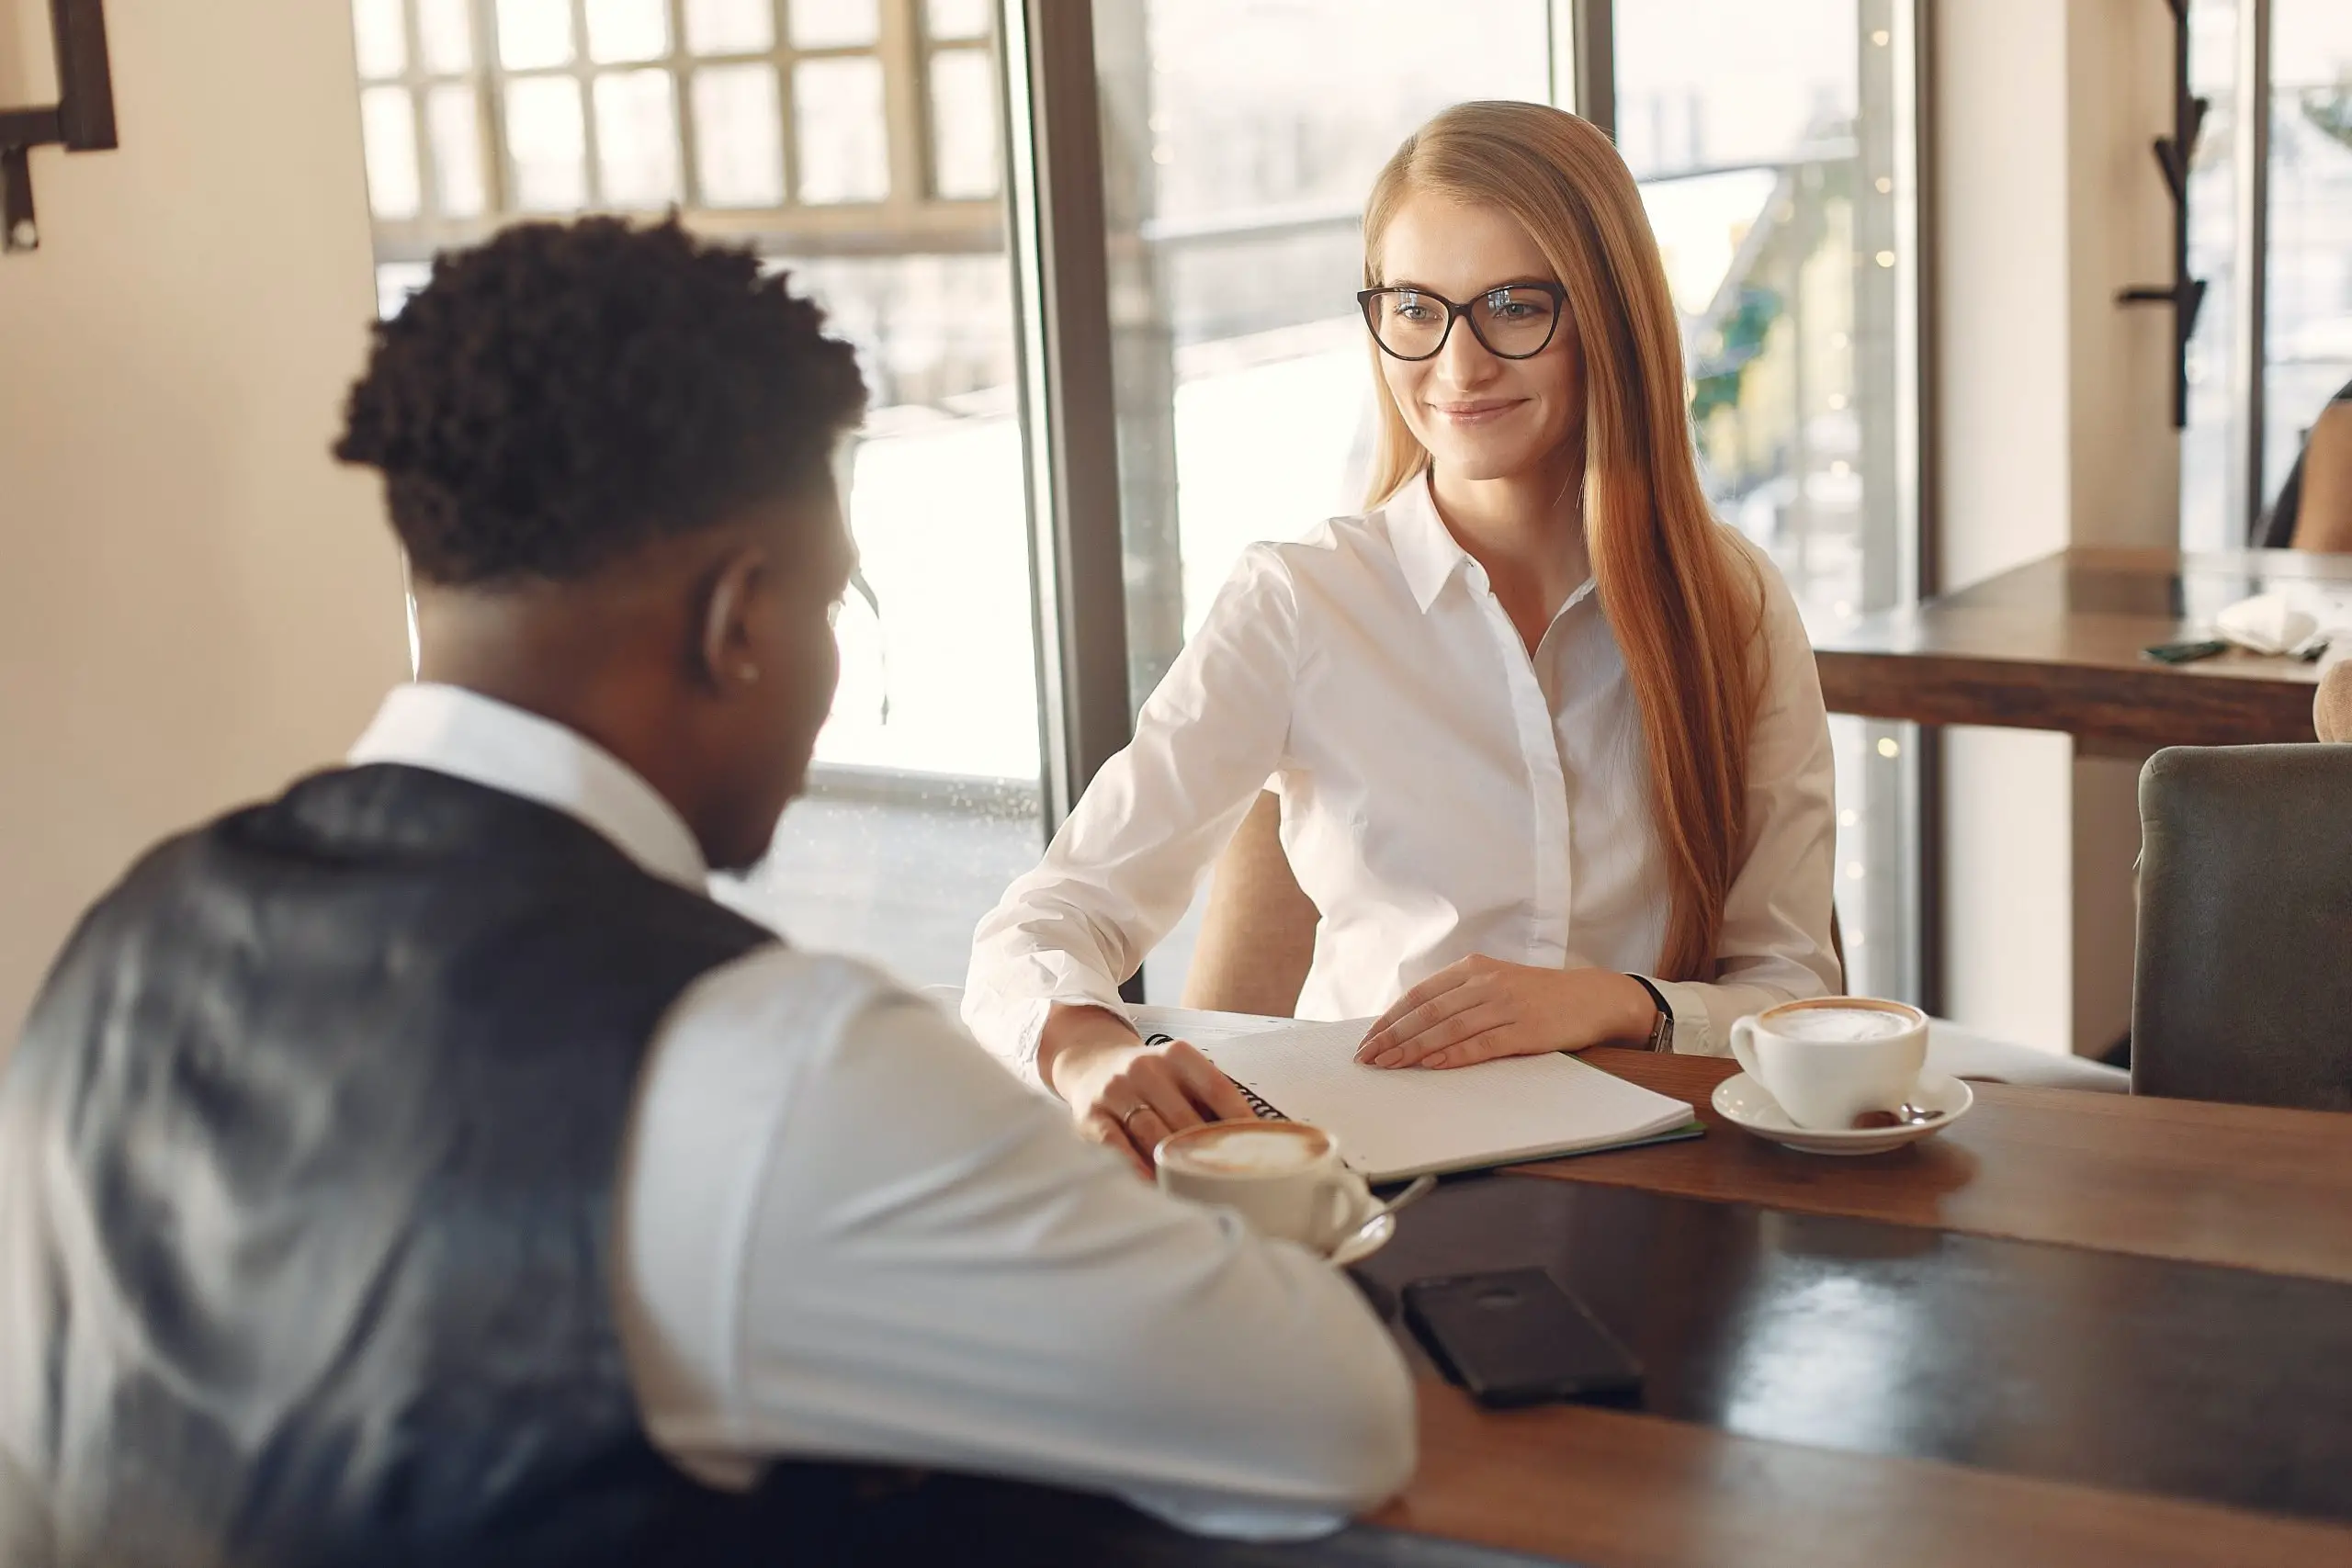 How to close an interview: 6 pertinent questions every candidate must ask